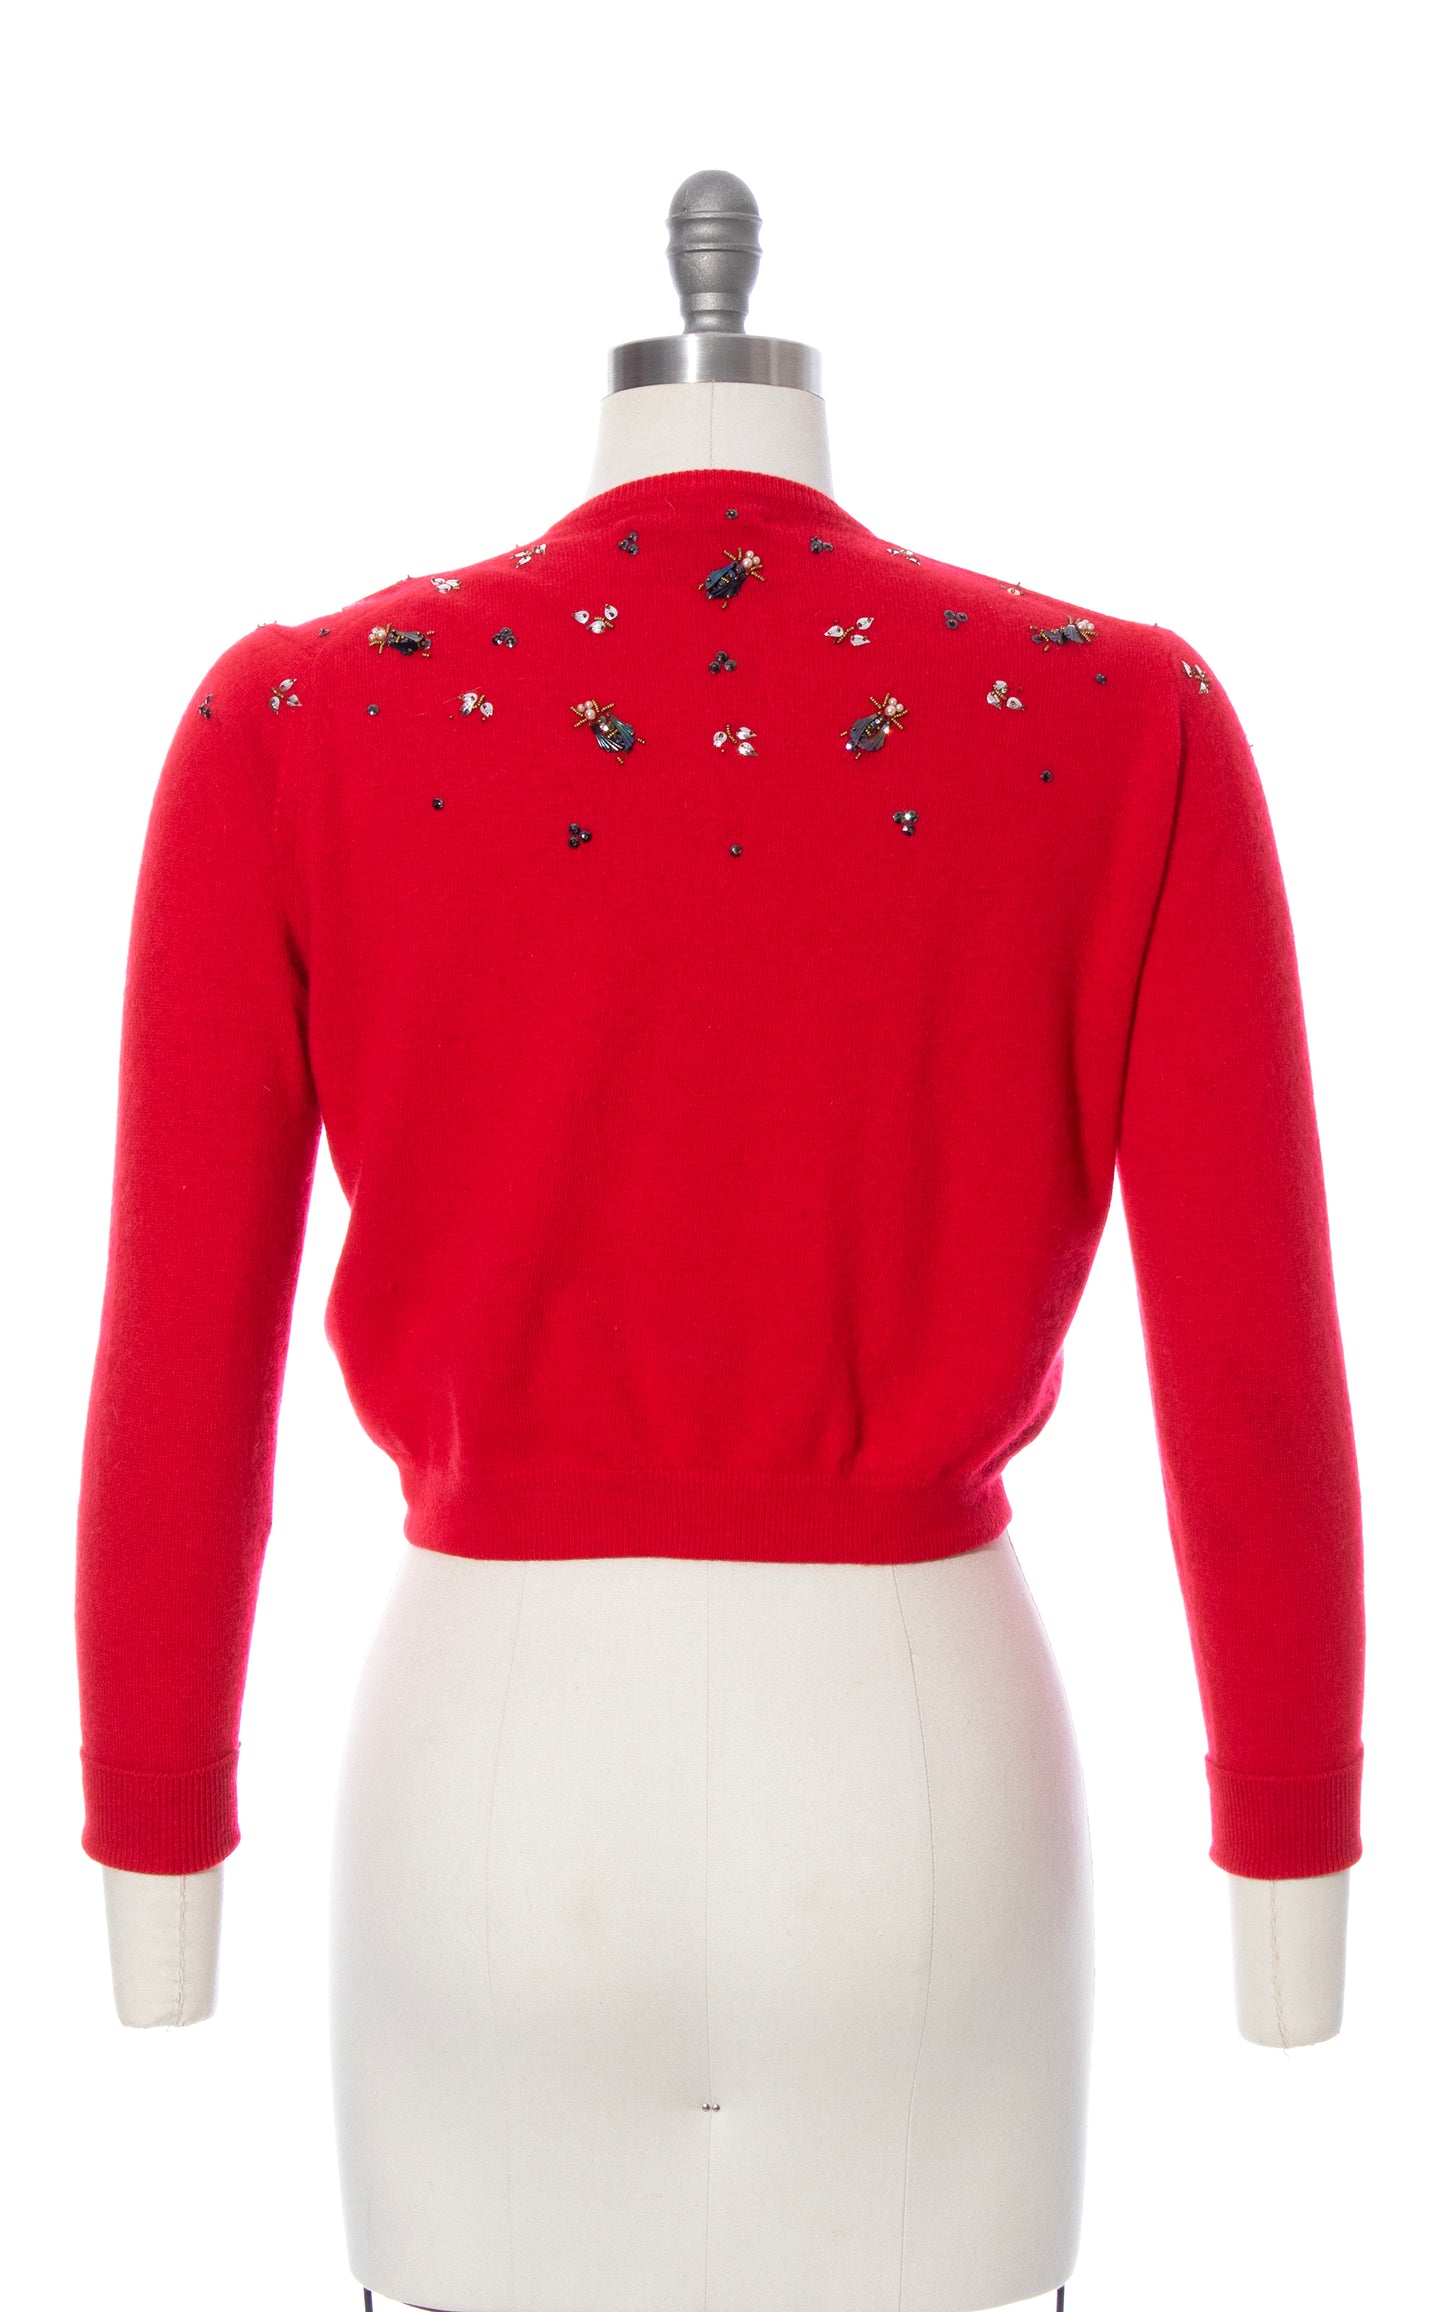 Vintage 50s 1950s Fly Novelty Sequin Beaded Red Knit Cashmere Cropped Cardigan BirthdayLifeVintage